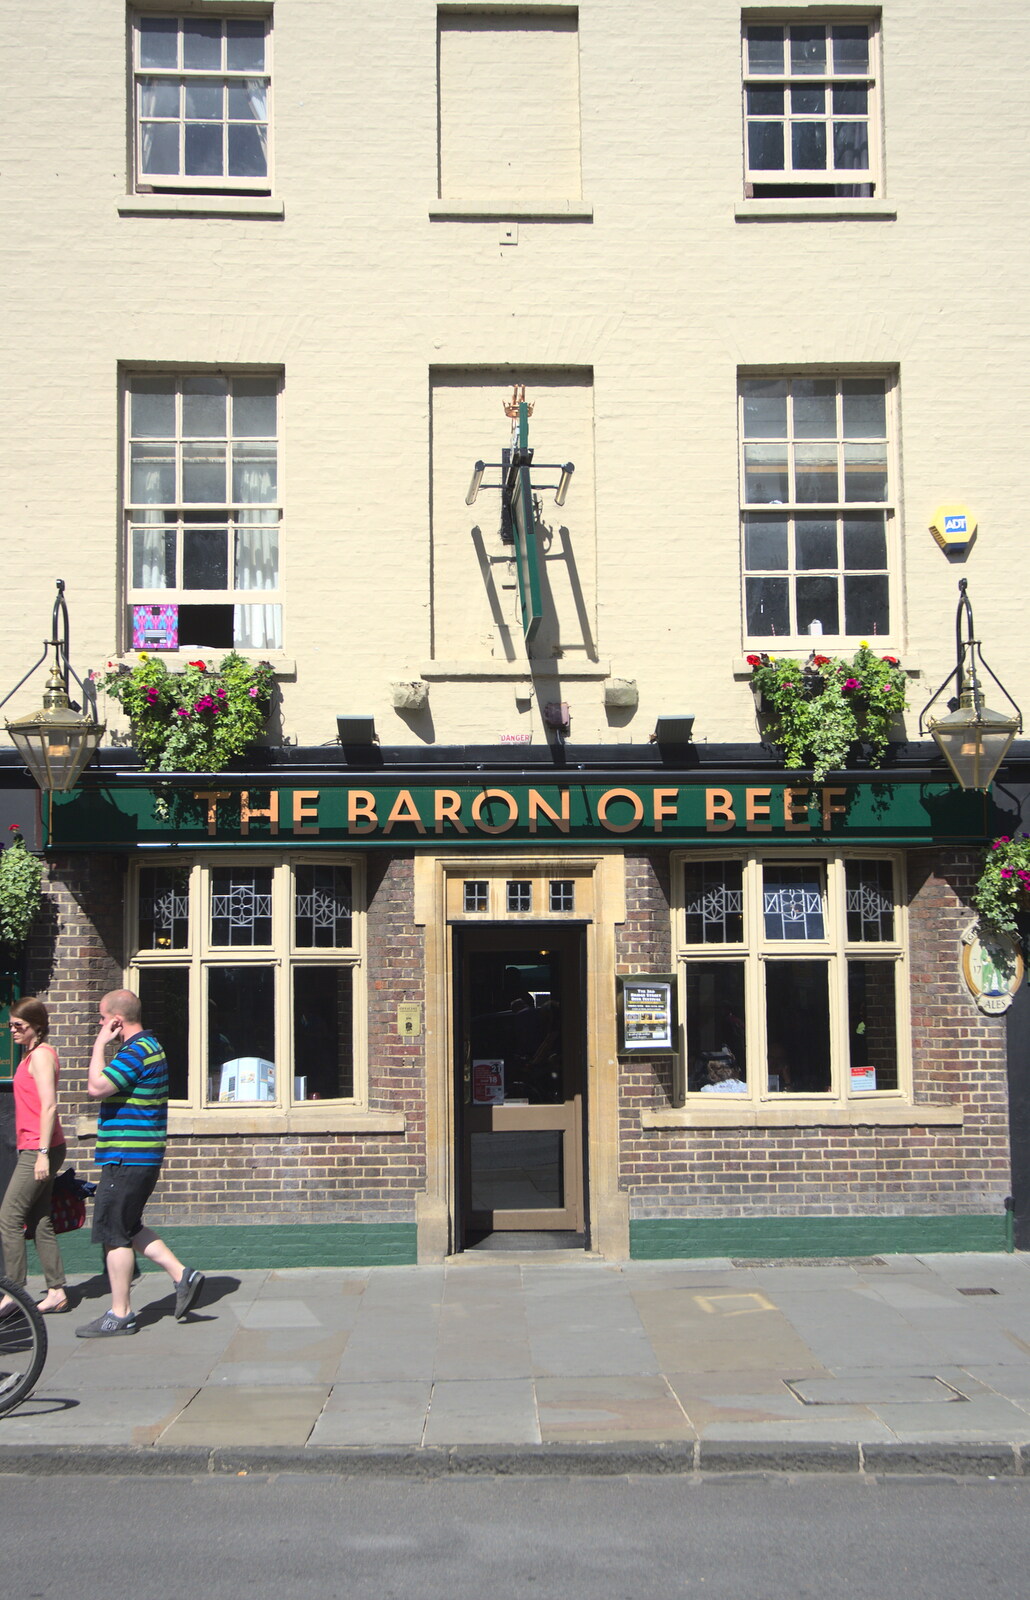 The Baron of Beef on Bridge Street from Punting With Grandad, Cambridge, Cambridgeshire - 6th June 2015